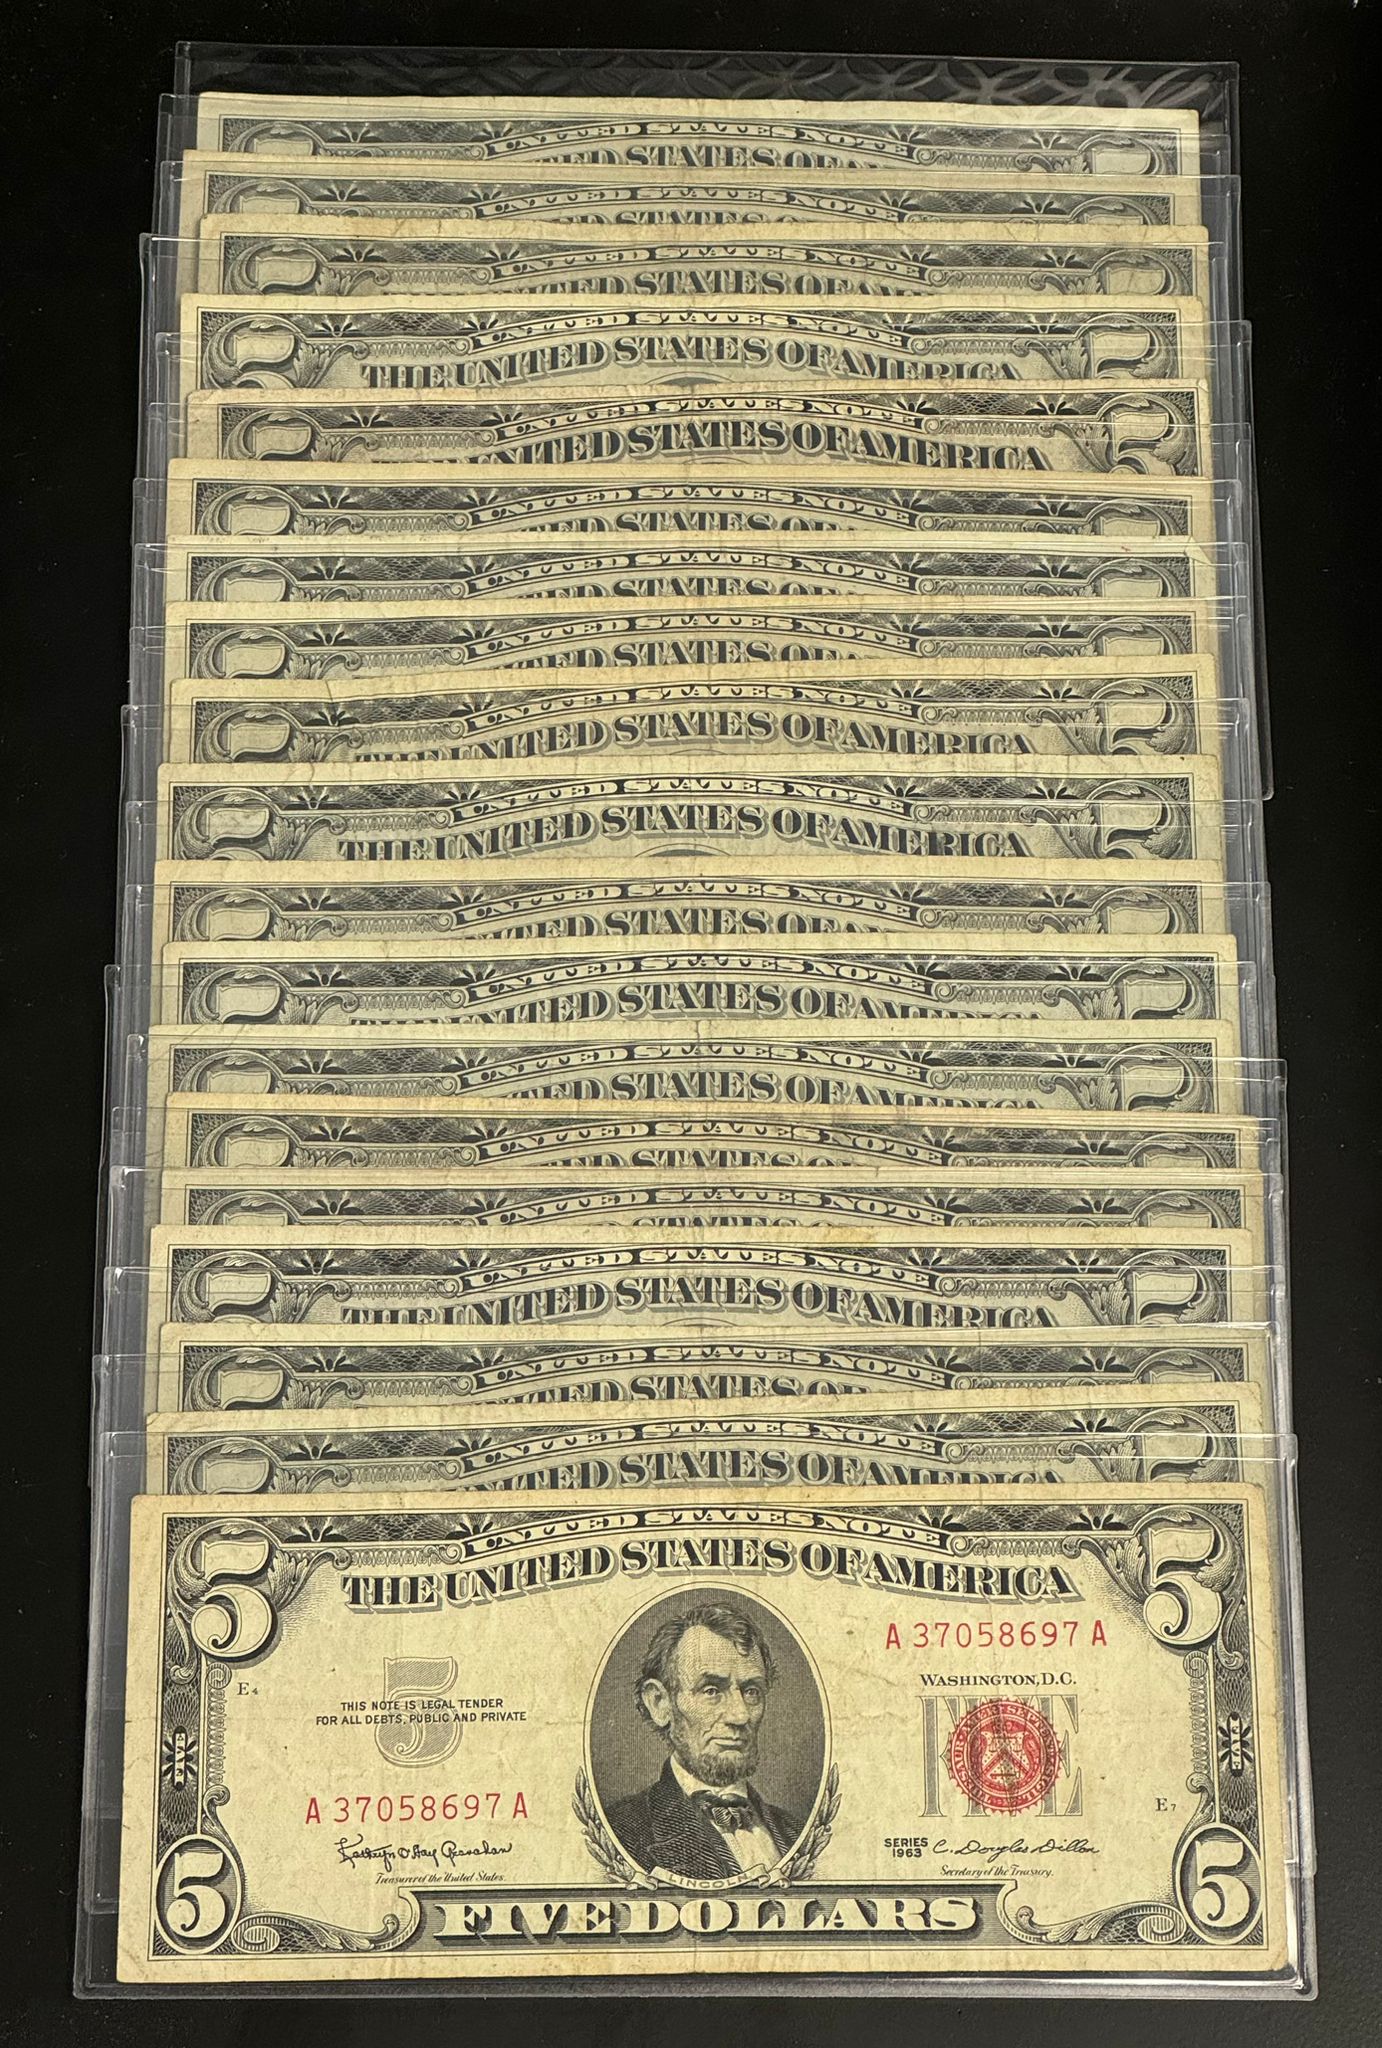 Cowboy State $5 Red Seal Notes - Very Fine